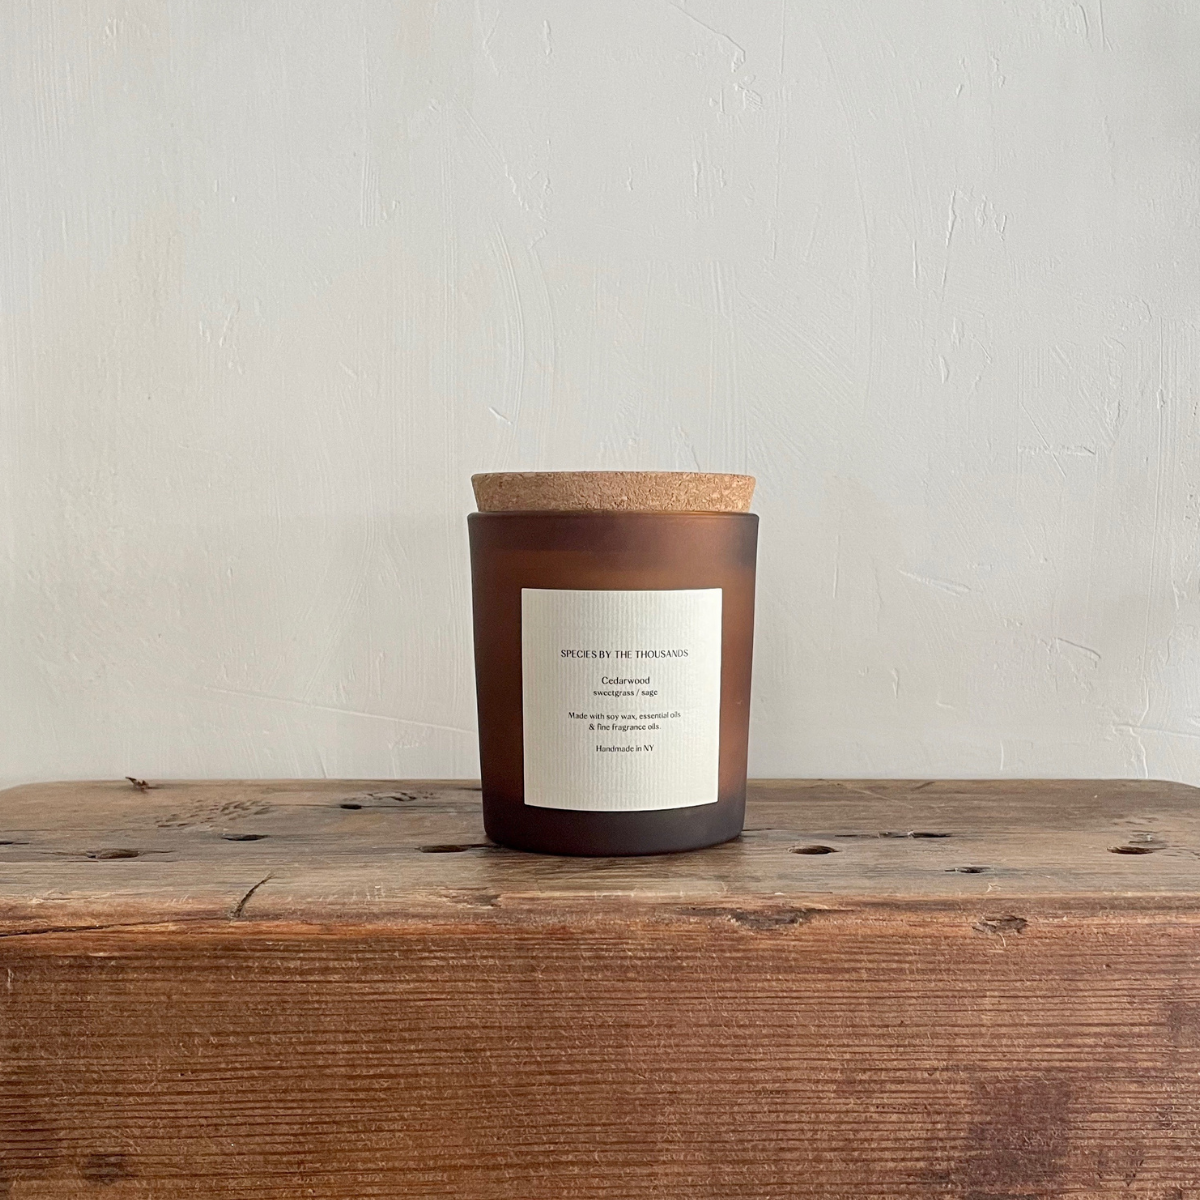 Cedarwood Sweetgrass + Sage Handcrafted Scented Soy Candle